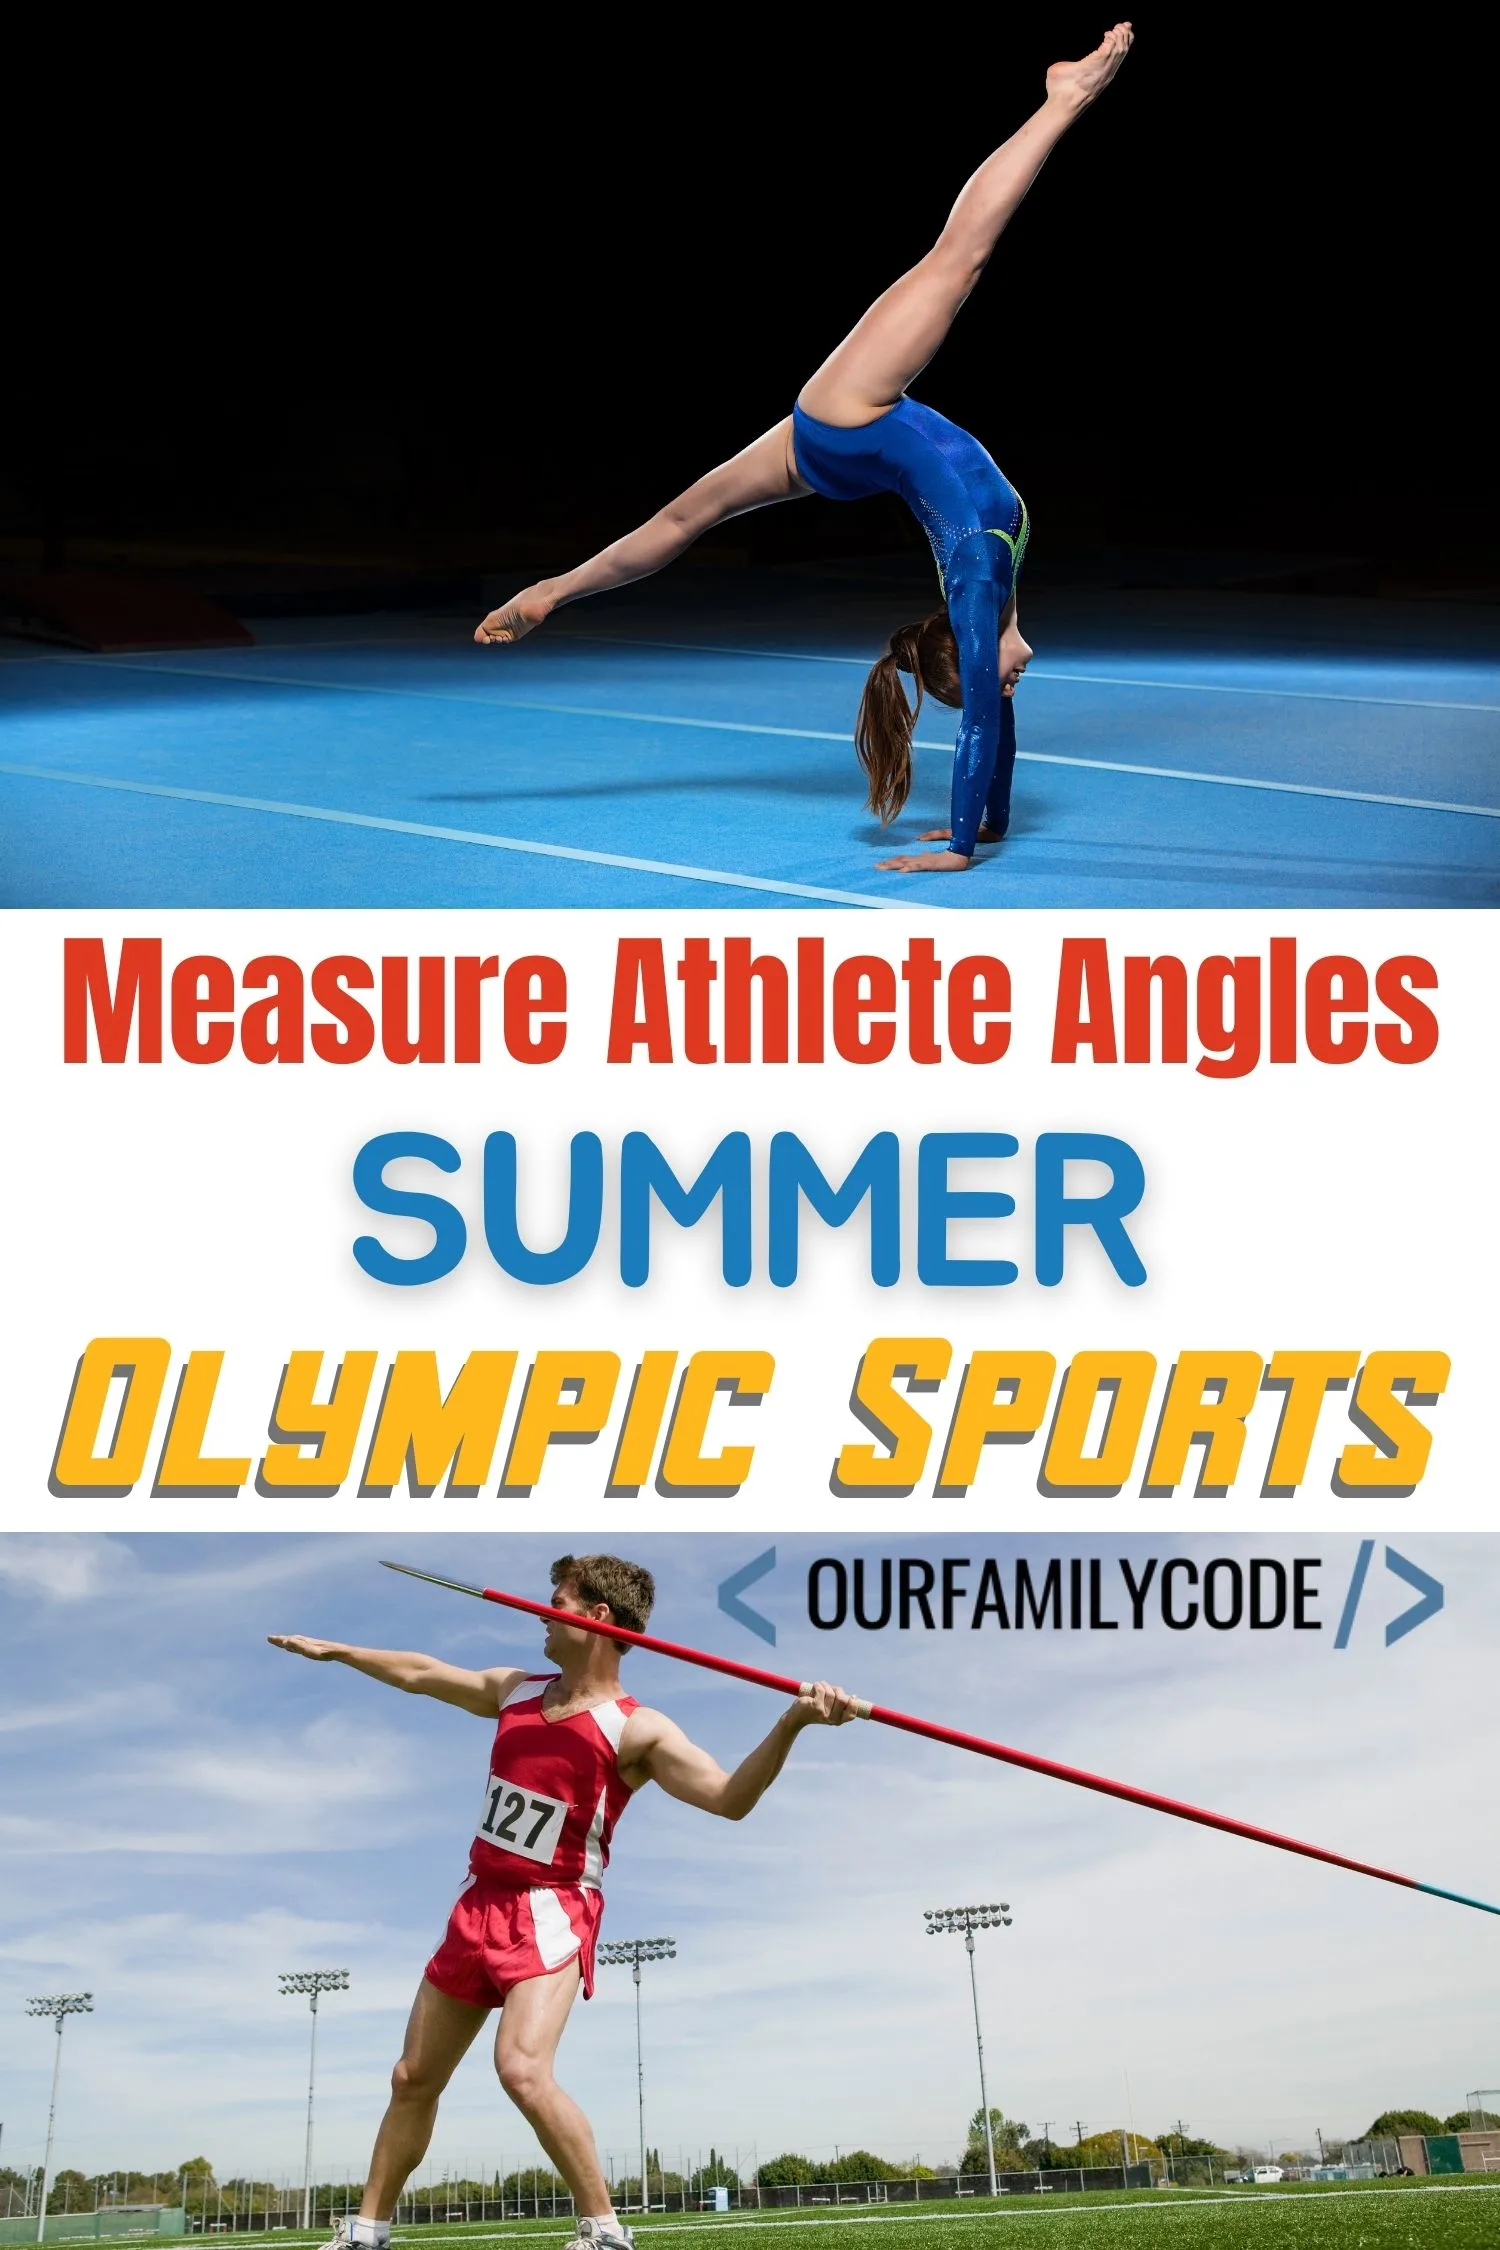 A picture of a gymnast flipping and a javelin athlete throwing a javelin with text that reads "measure athlete angles summer Olympic sports".